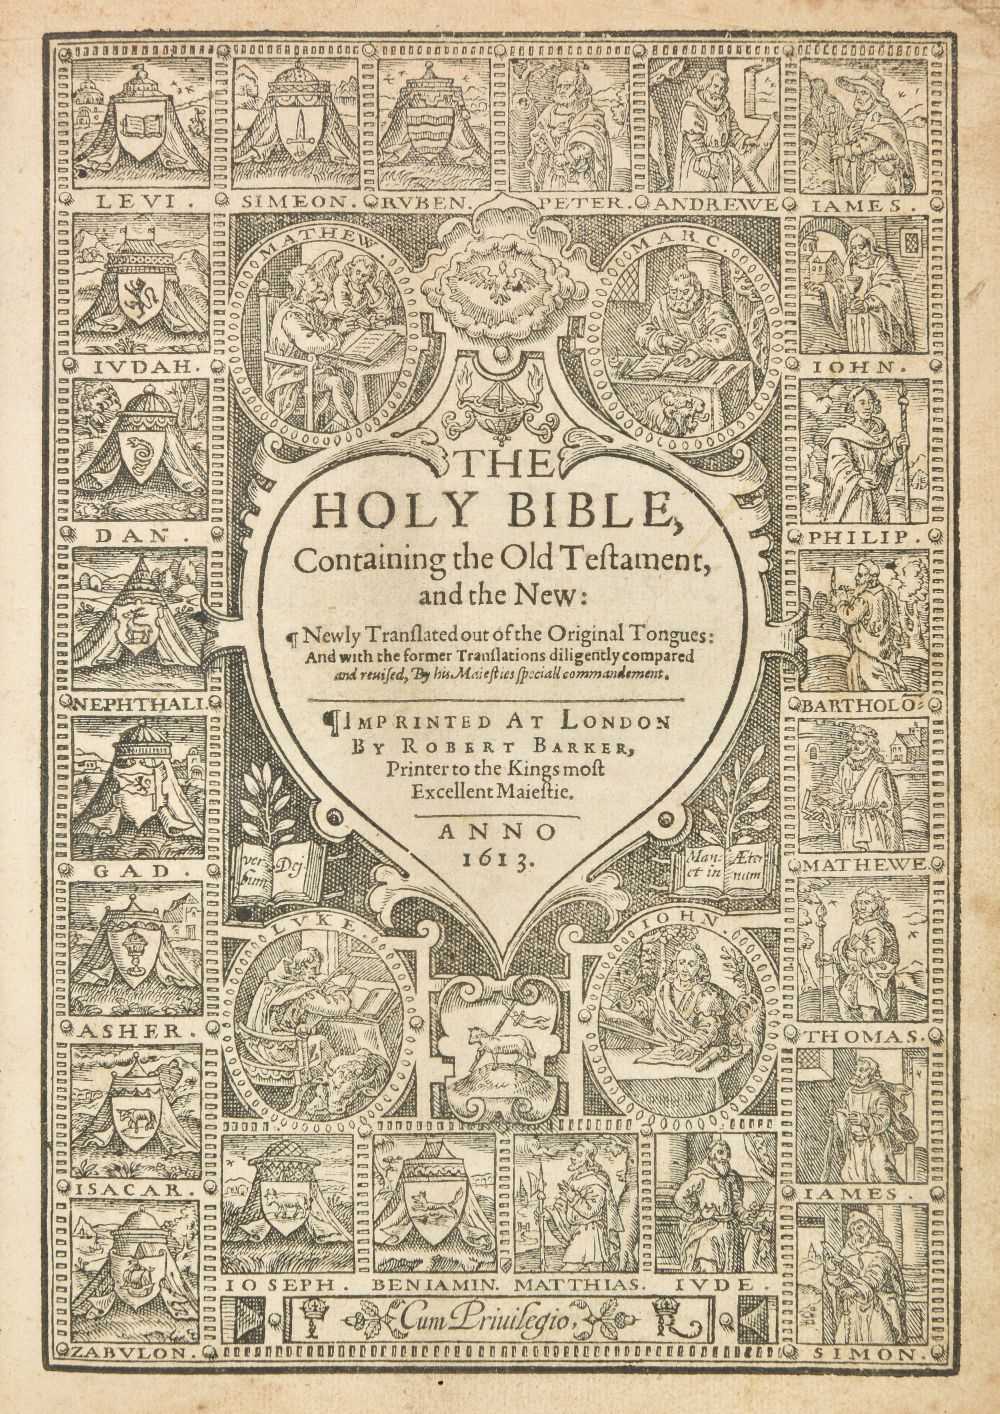 Lot 277 - Bible [English], The Holy Bible, Containing the Old Testament, and the New, 1613